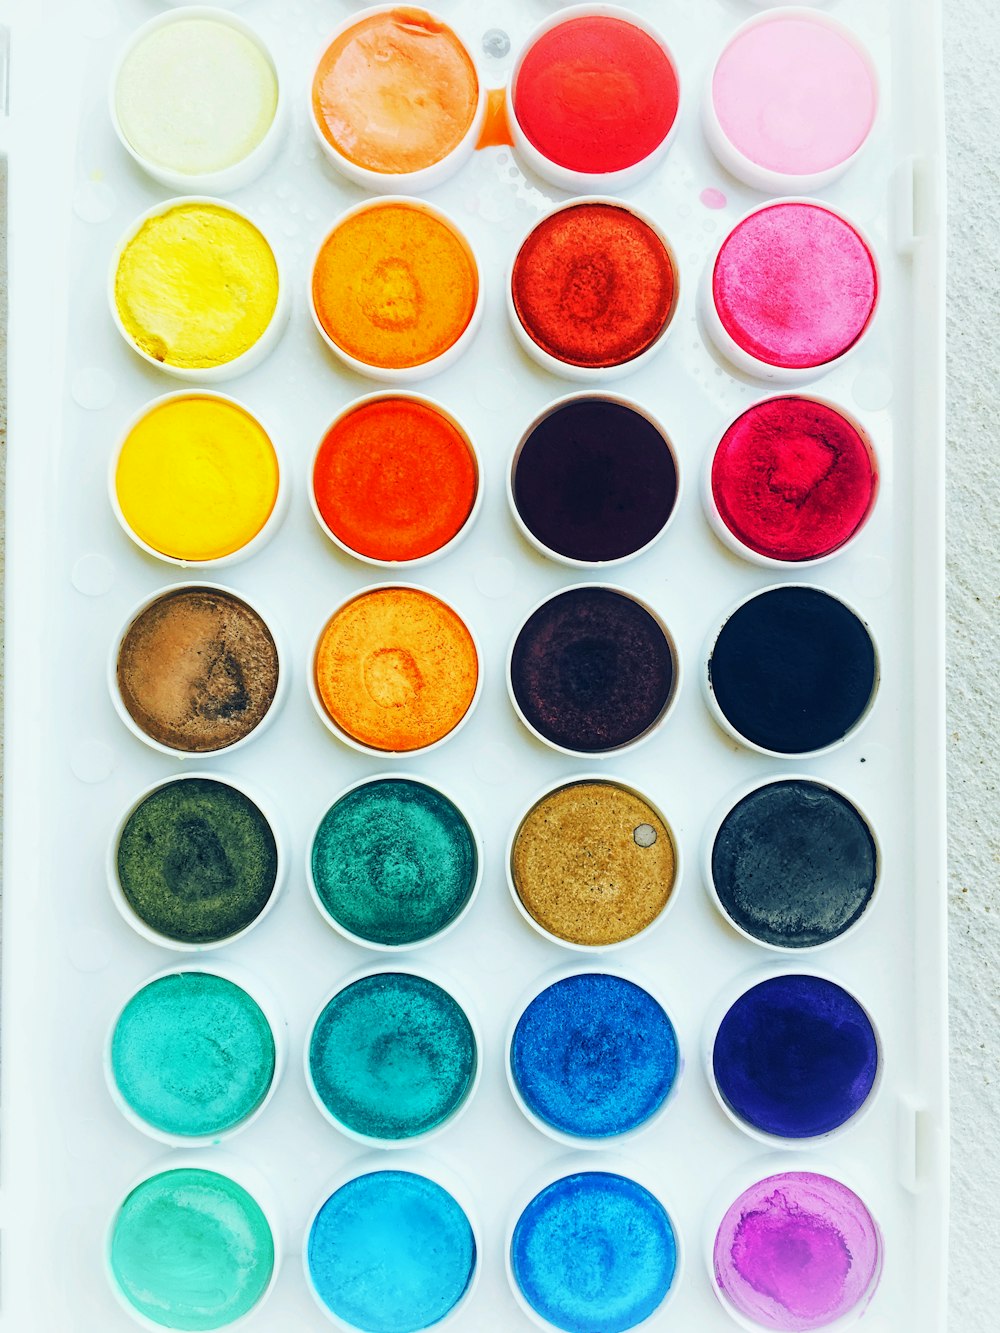 Watercolor Palette Pictures  Download Free Images on Unsplash